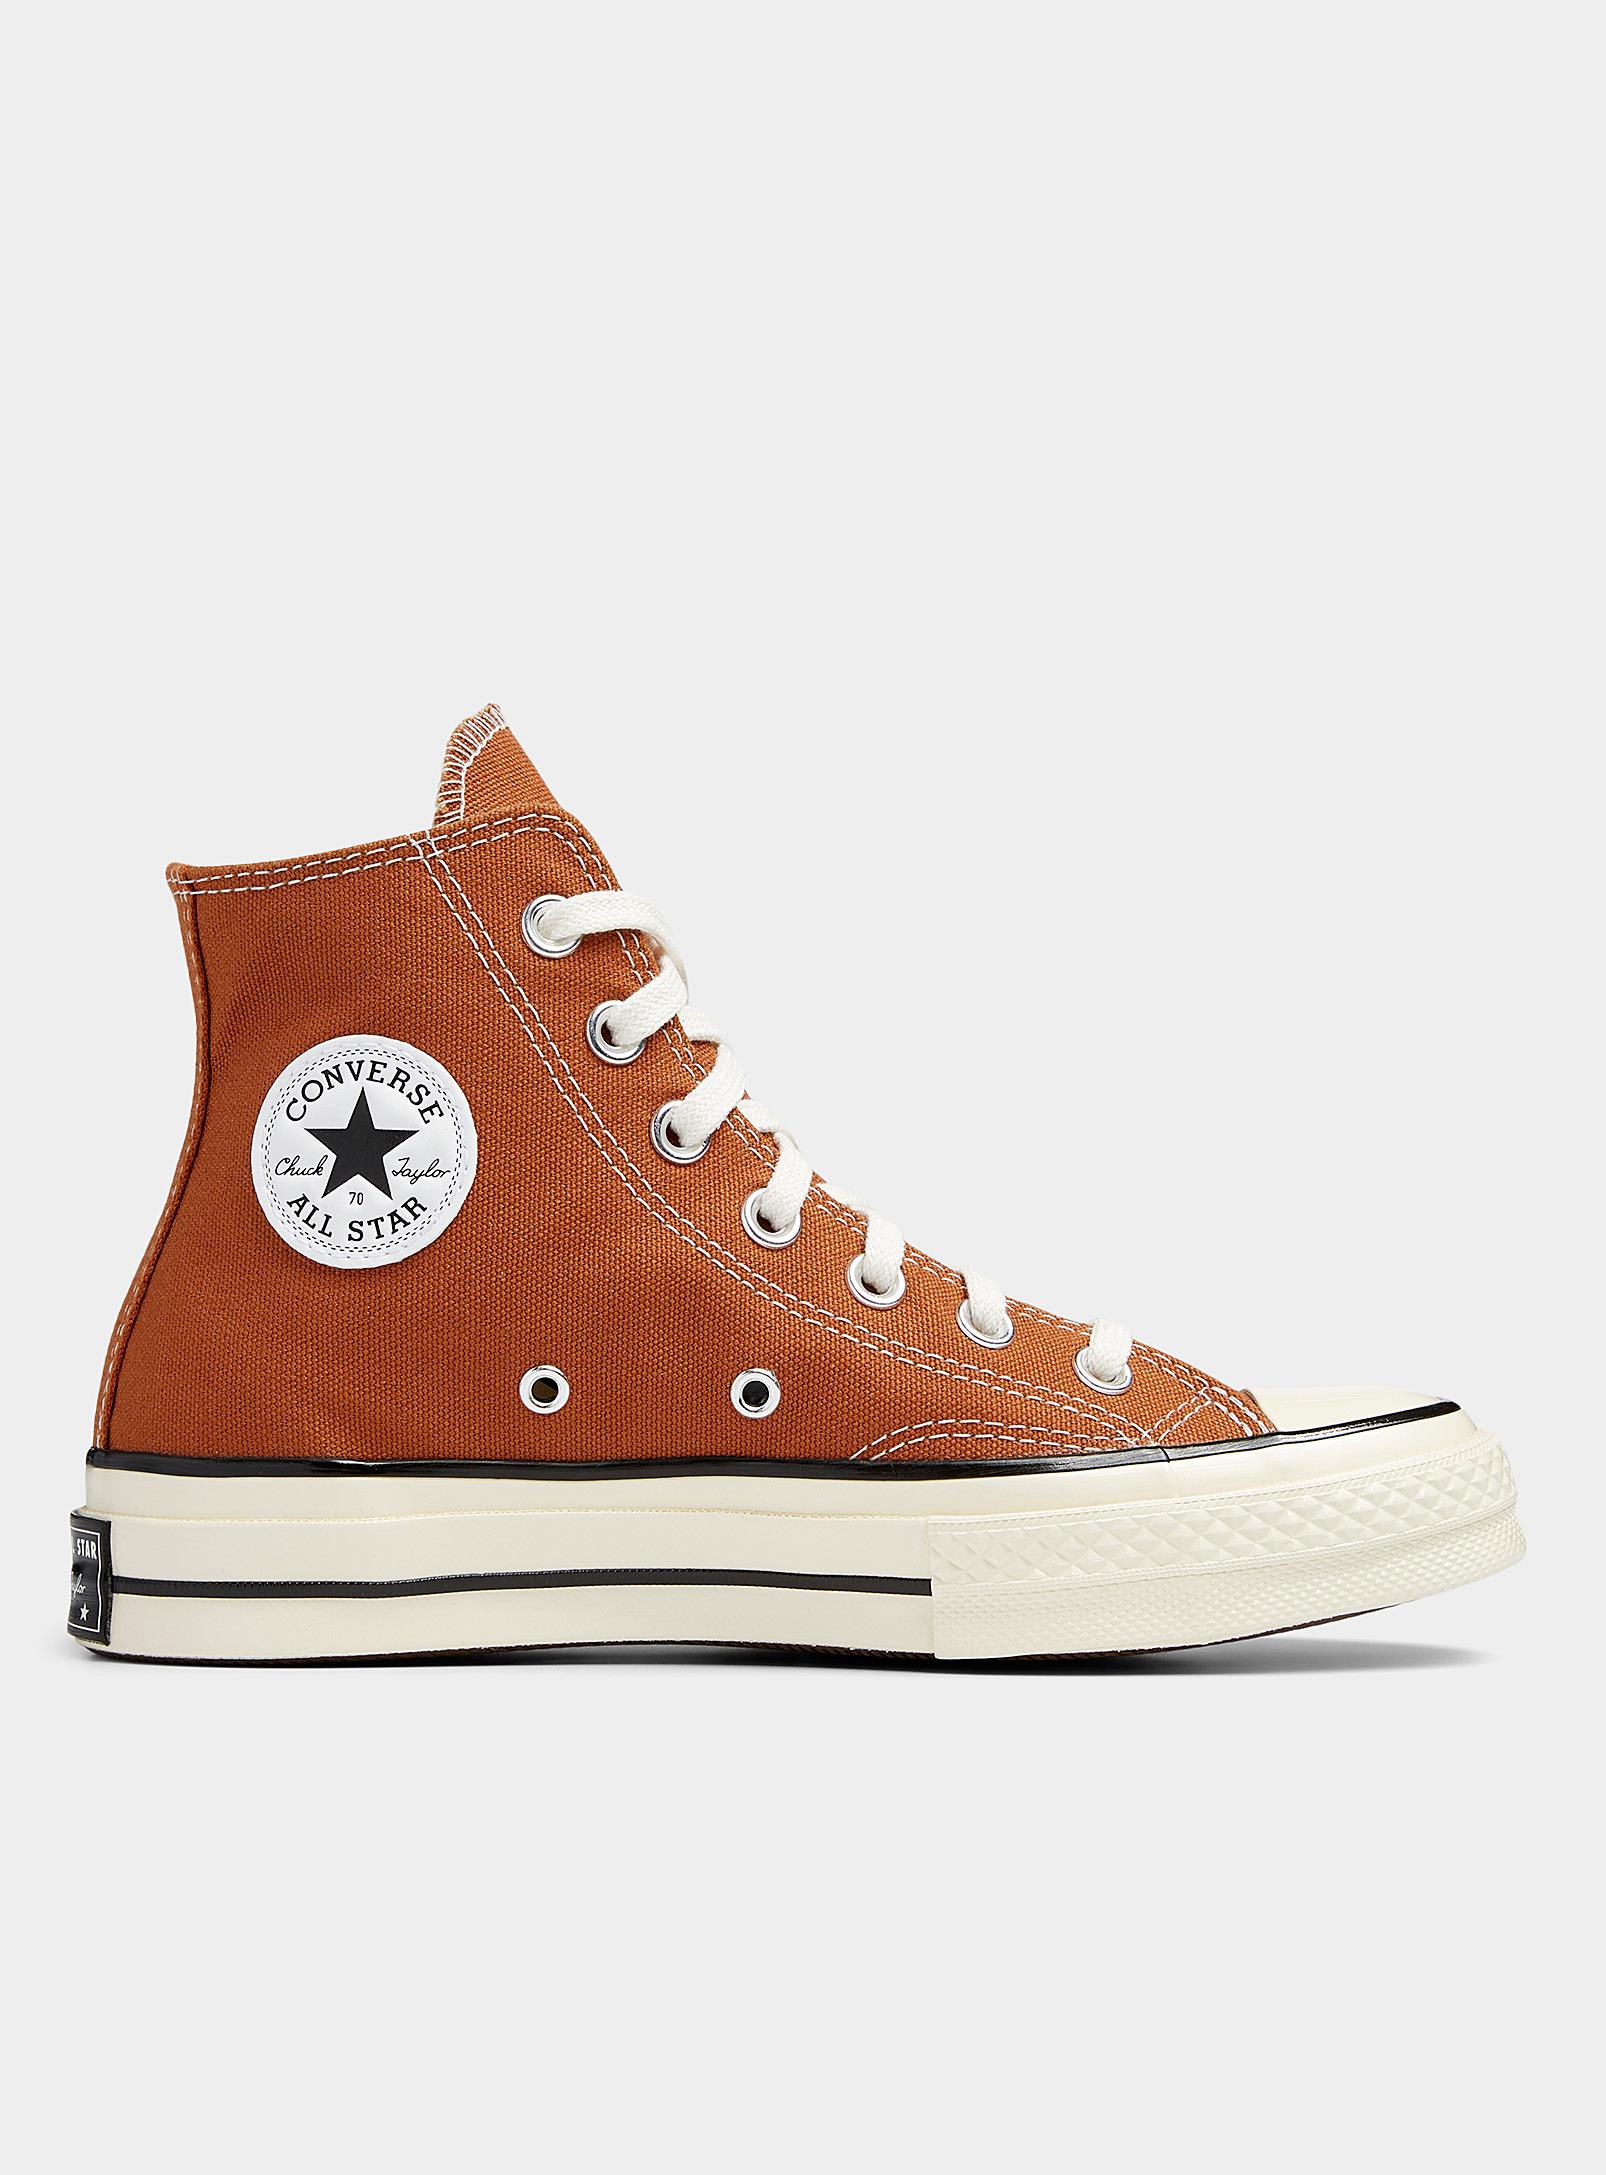 Converse Tawny Owl Chuck 70 High Top Sneakers Women in Brown | Lyst